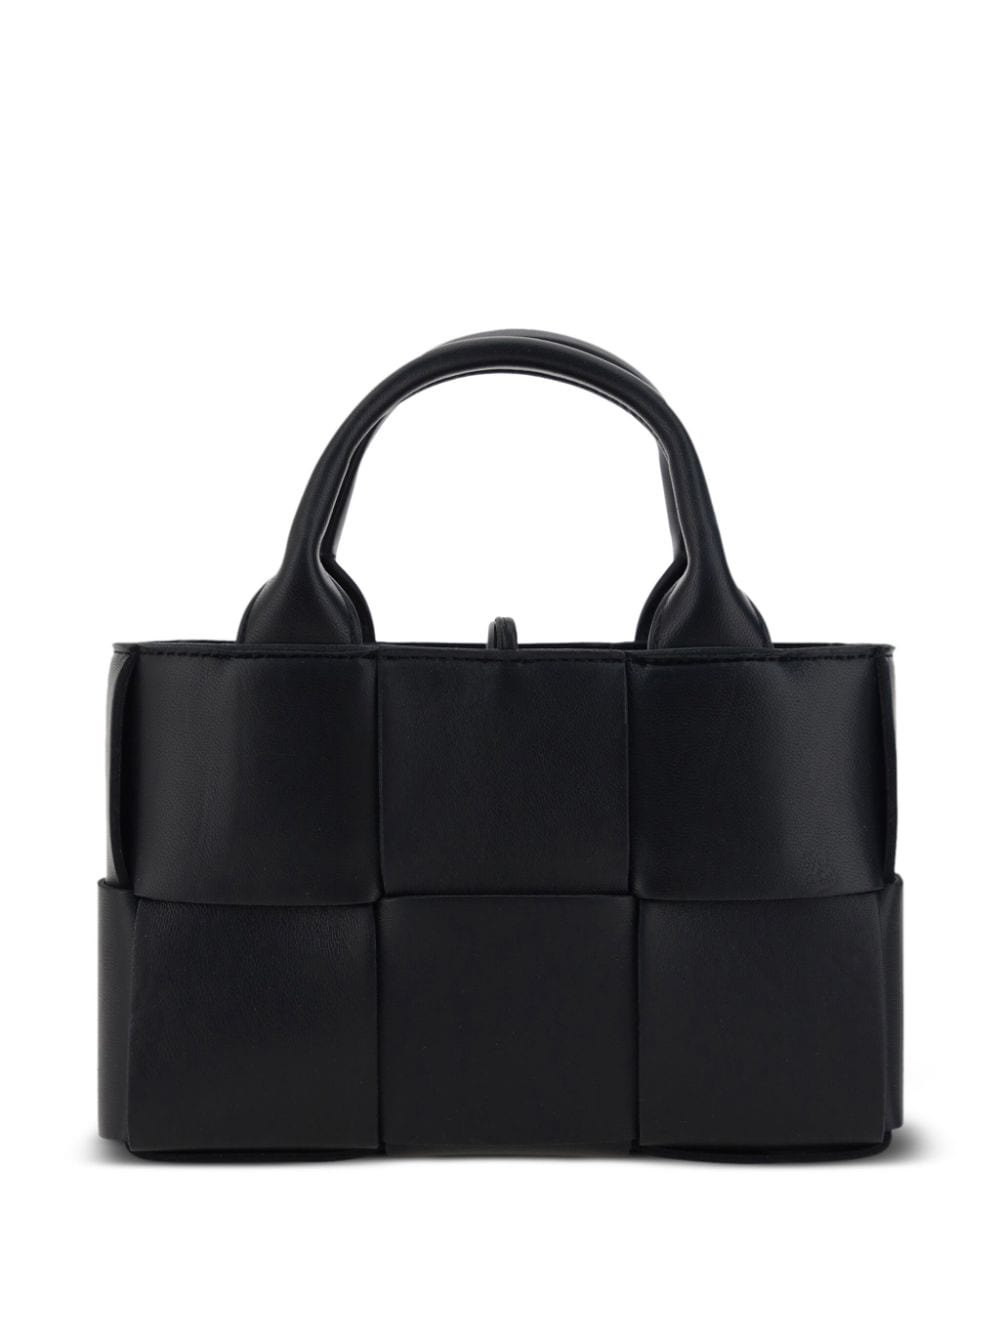 Candy Arco leather tote bag